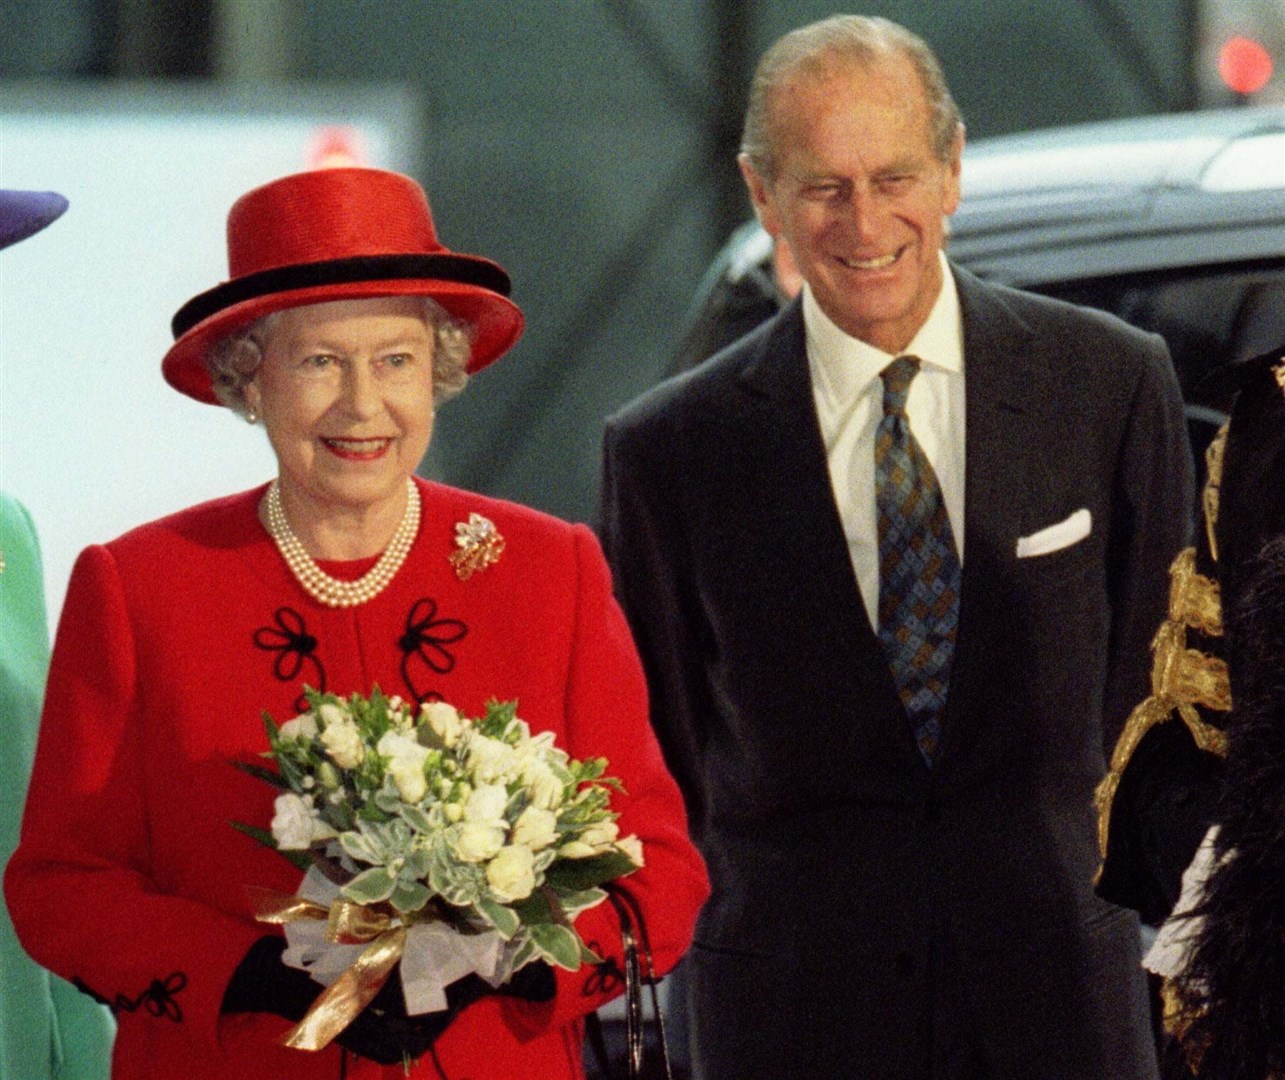 The Queen and Duke of Edinburgh marking their 50th wedding anniversary in 1997 (PA)